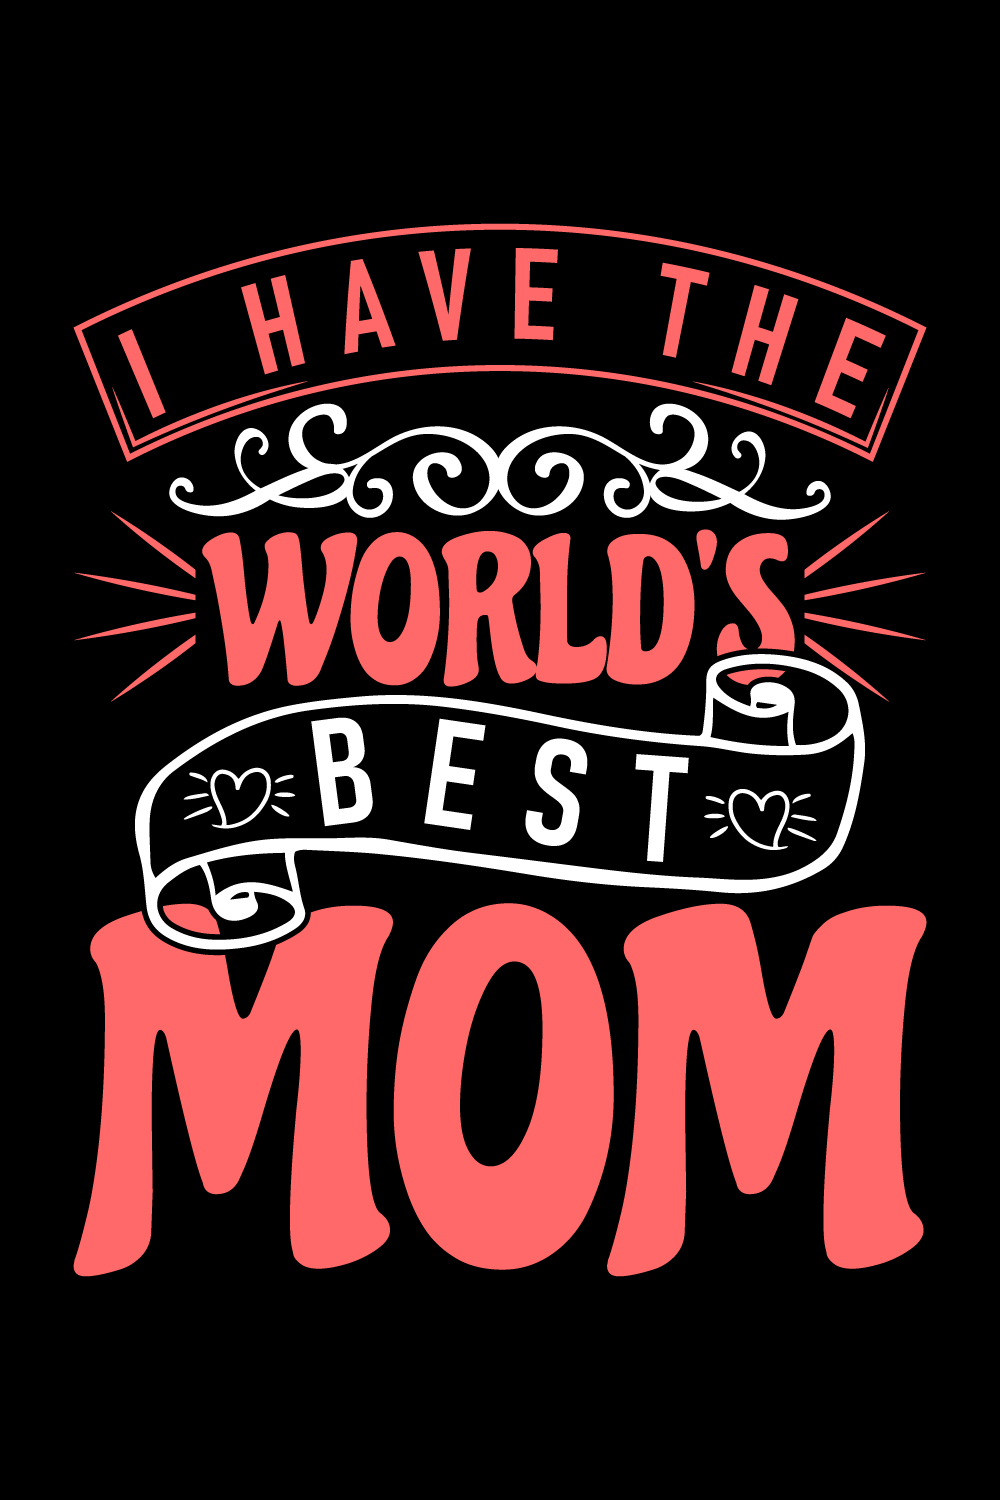 The world best mom t shirt pinterest preview image.